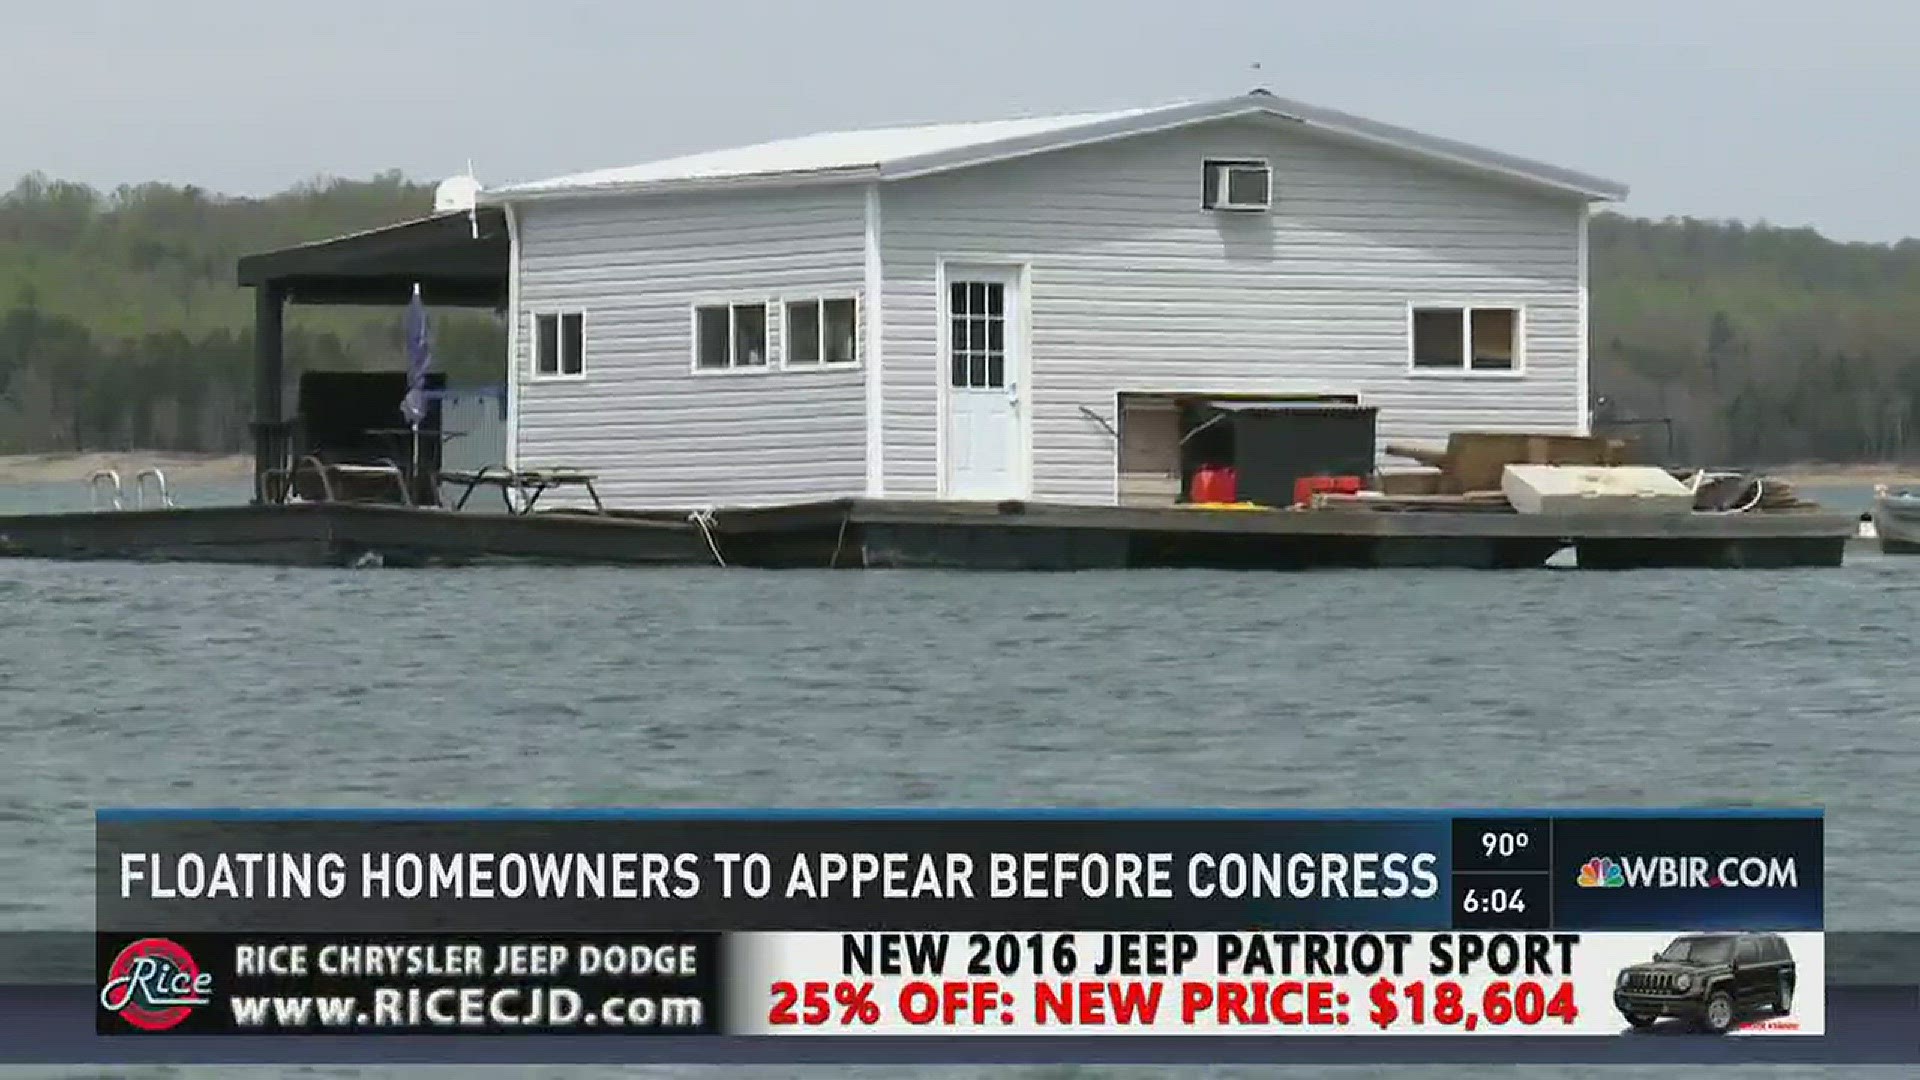 Sept. 20, 2016: Floating home owners and TVA representatives will testify before Congress Friday about TVA's decision to eliminate floating homes from public lakes and rivers.